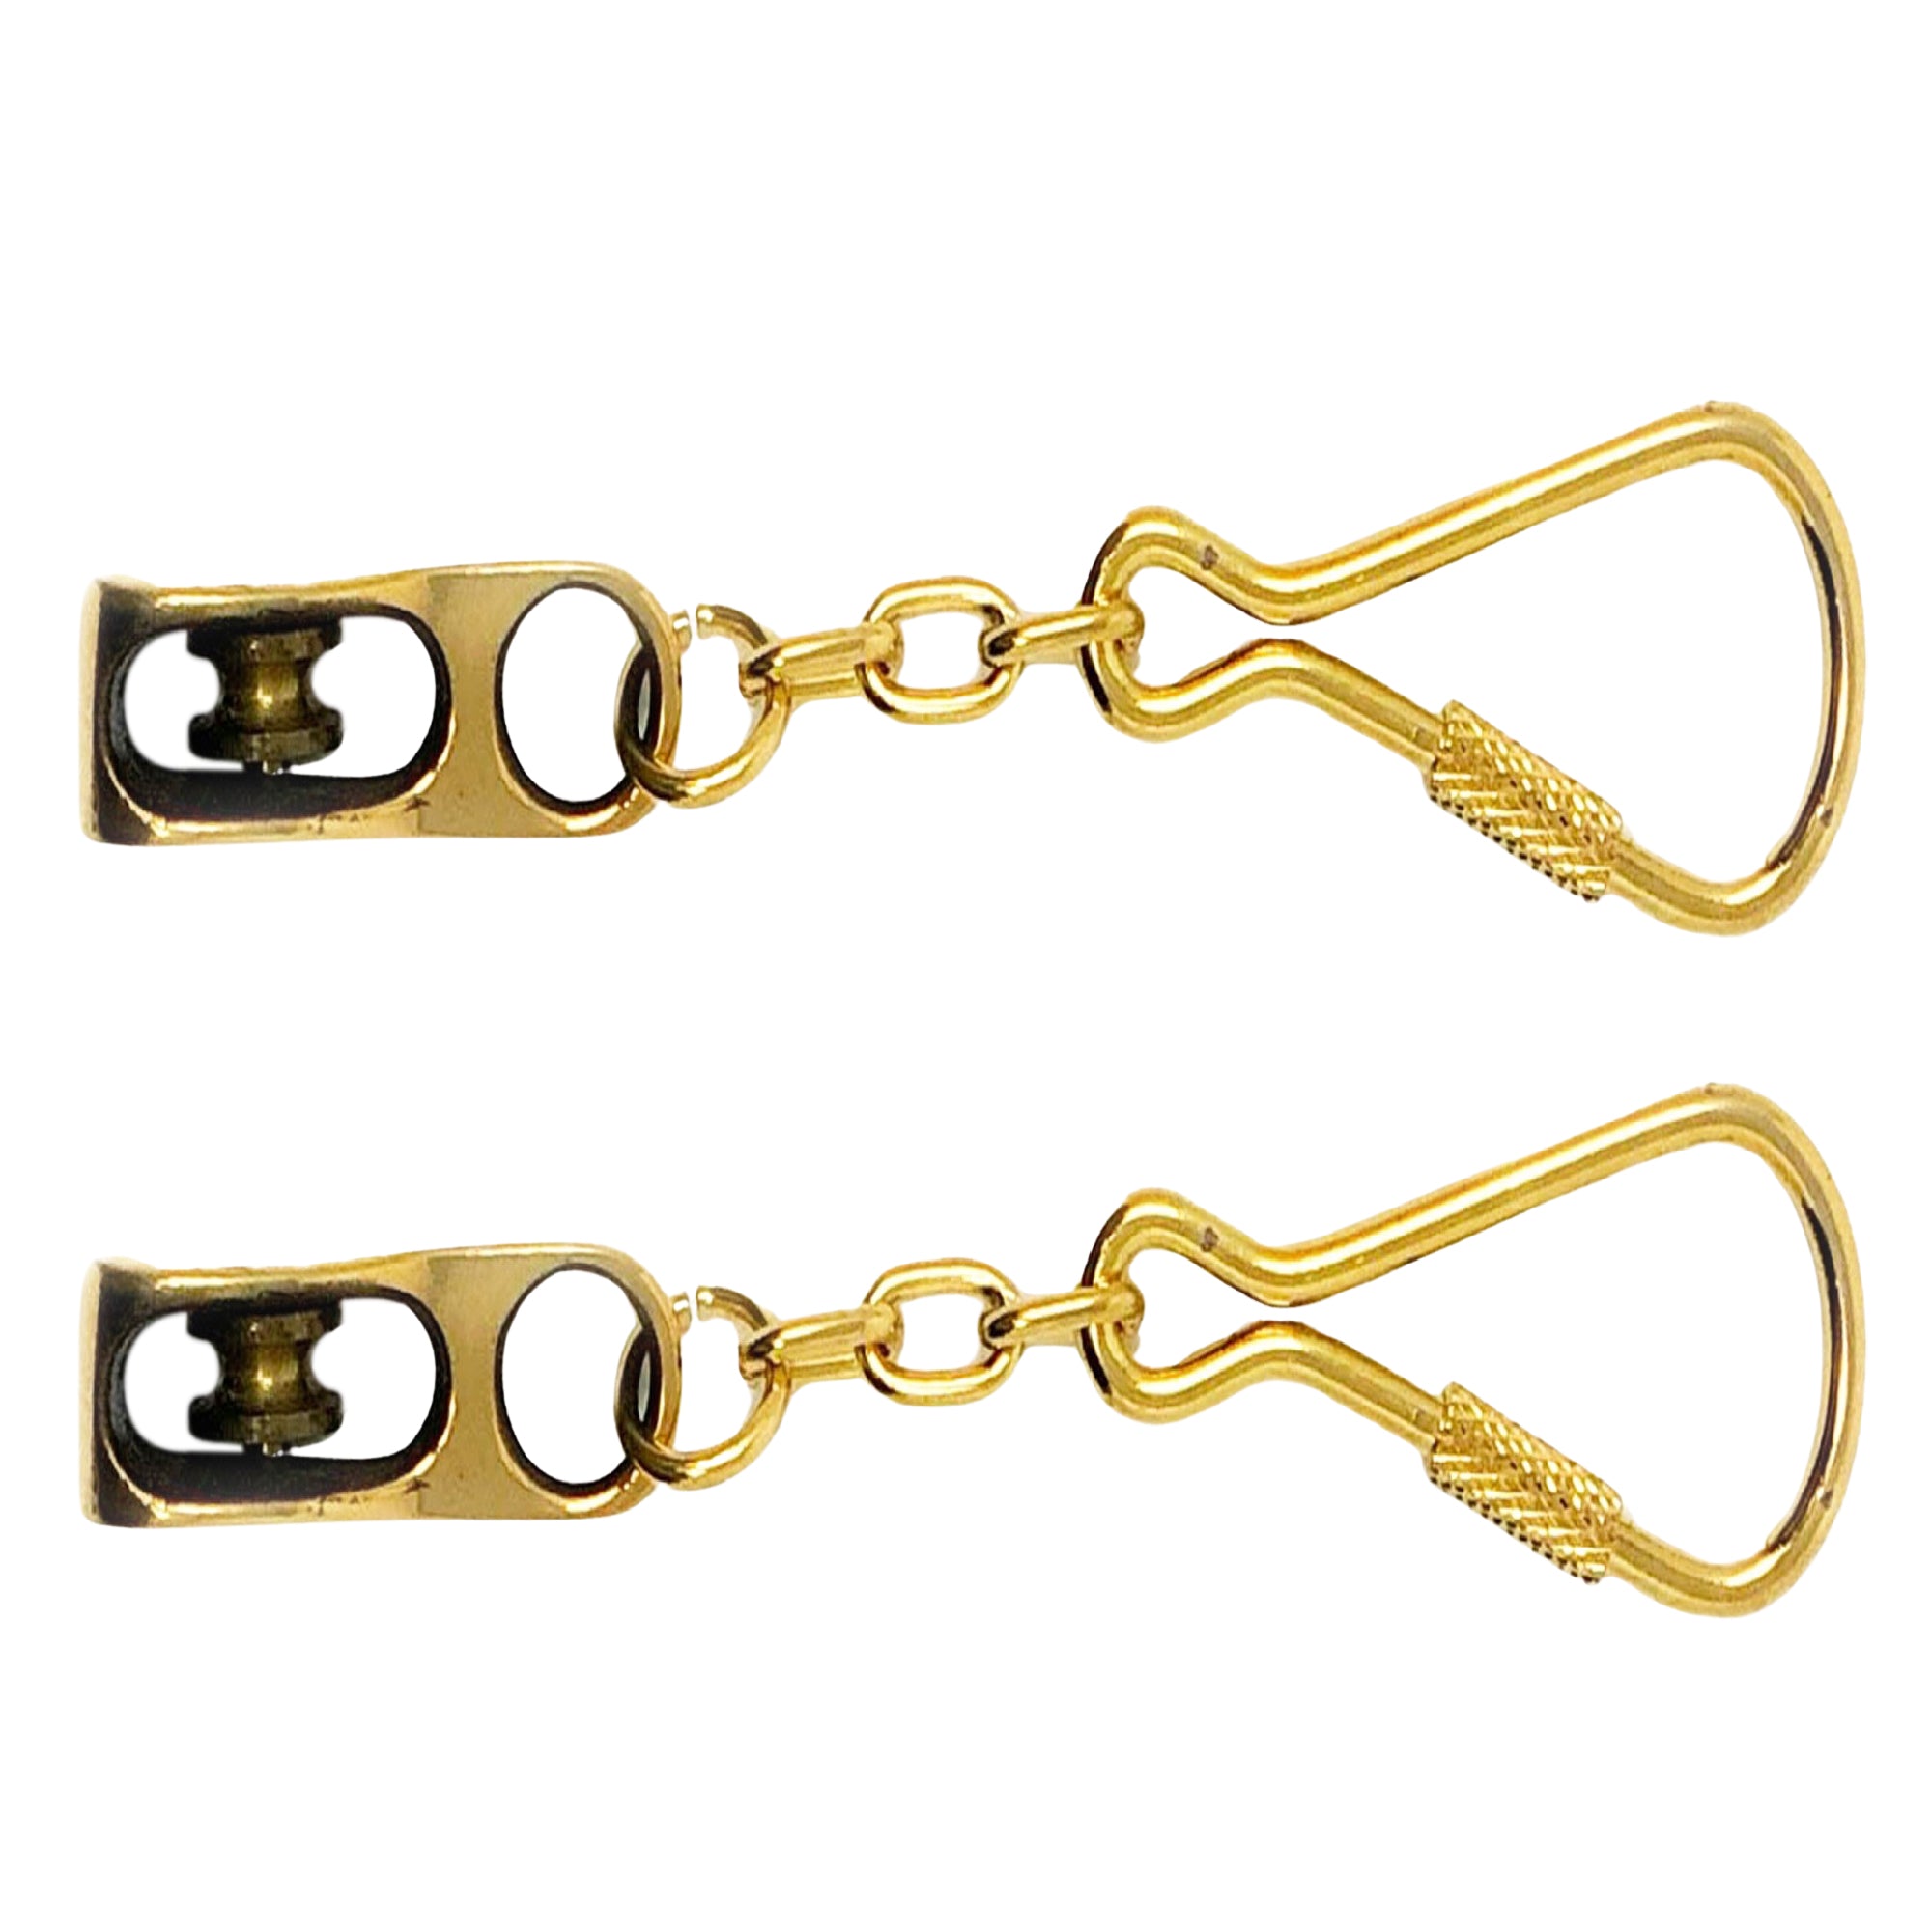 Block Keychain, Solid Brass 2-Pack - FO2216-M2